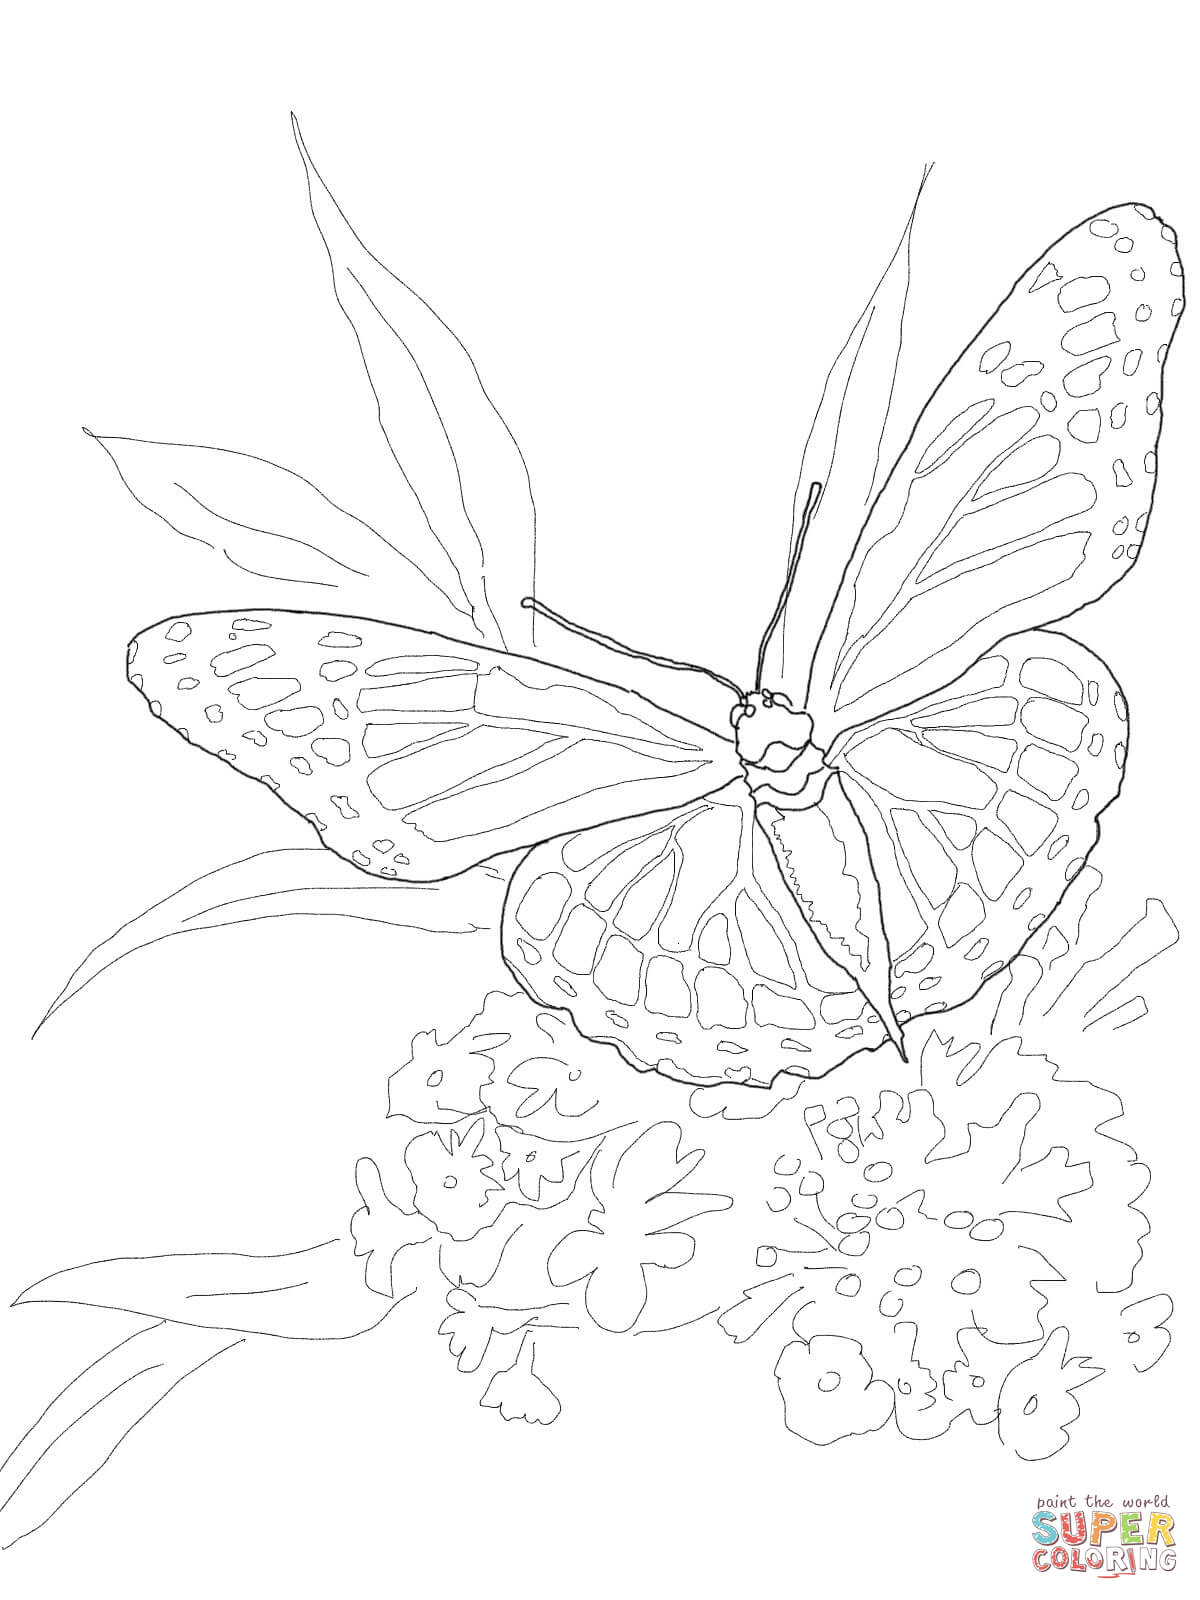 Monarch Butterfly Coloring Page Monarch Butterfly Coloring Page Free Printable Coloring Pages